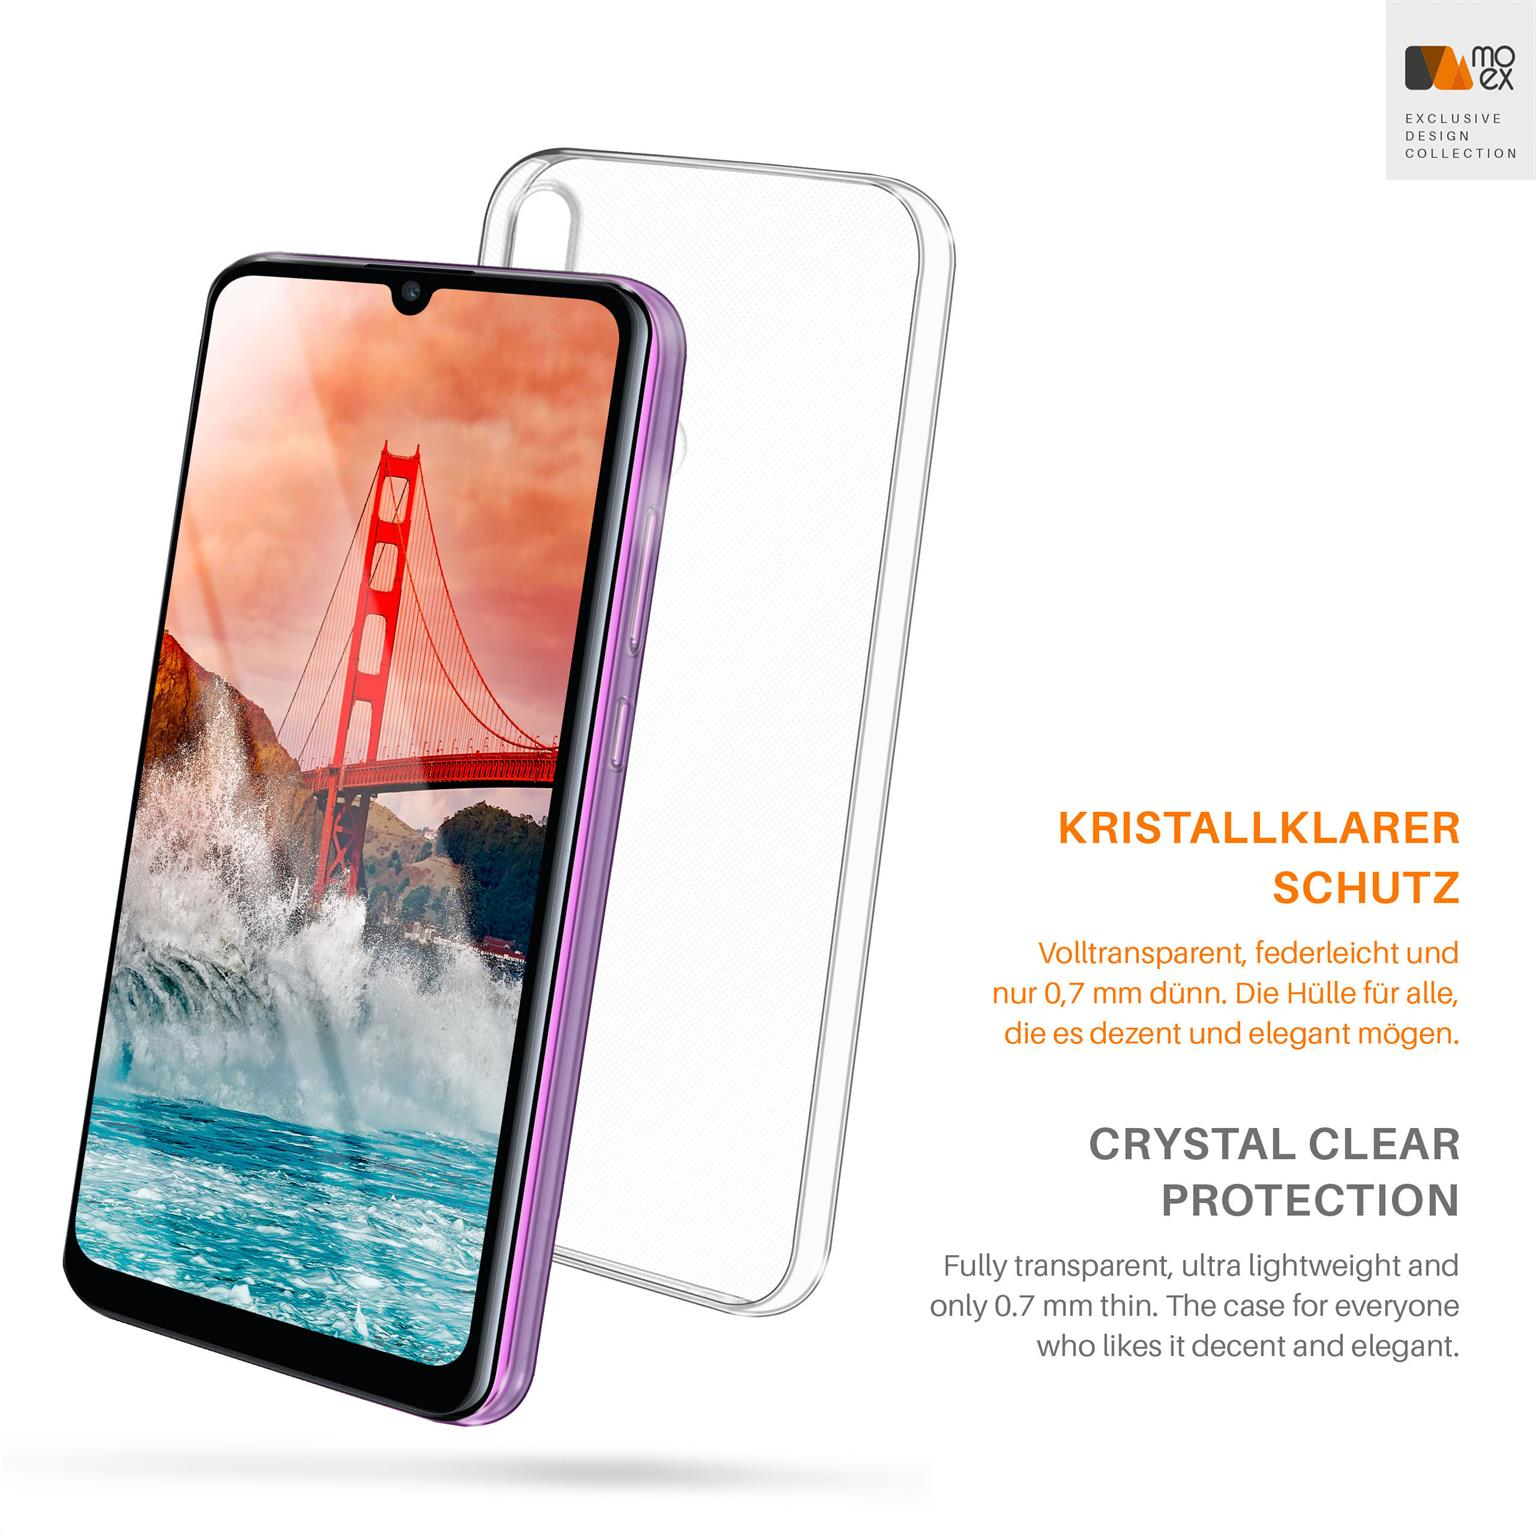 Crystal-Clear Y6p, MOEX Aero Case, Huawei, Backcover,